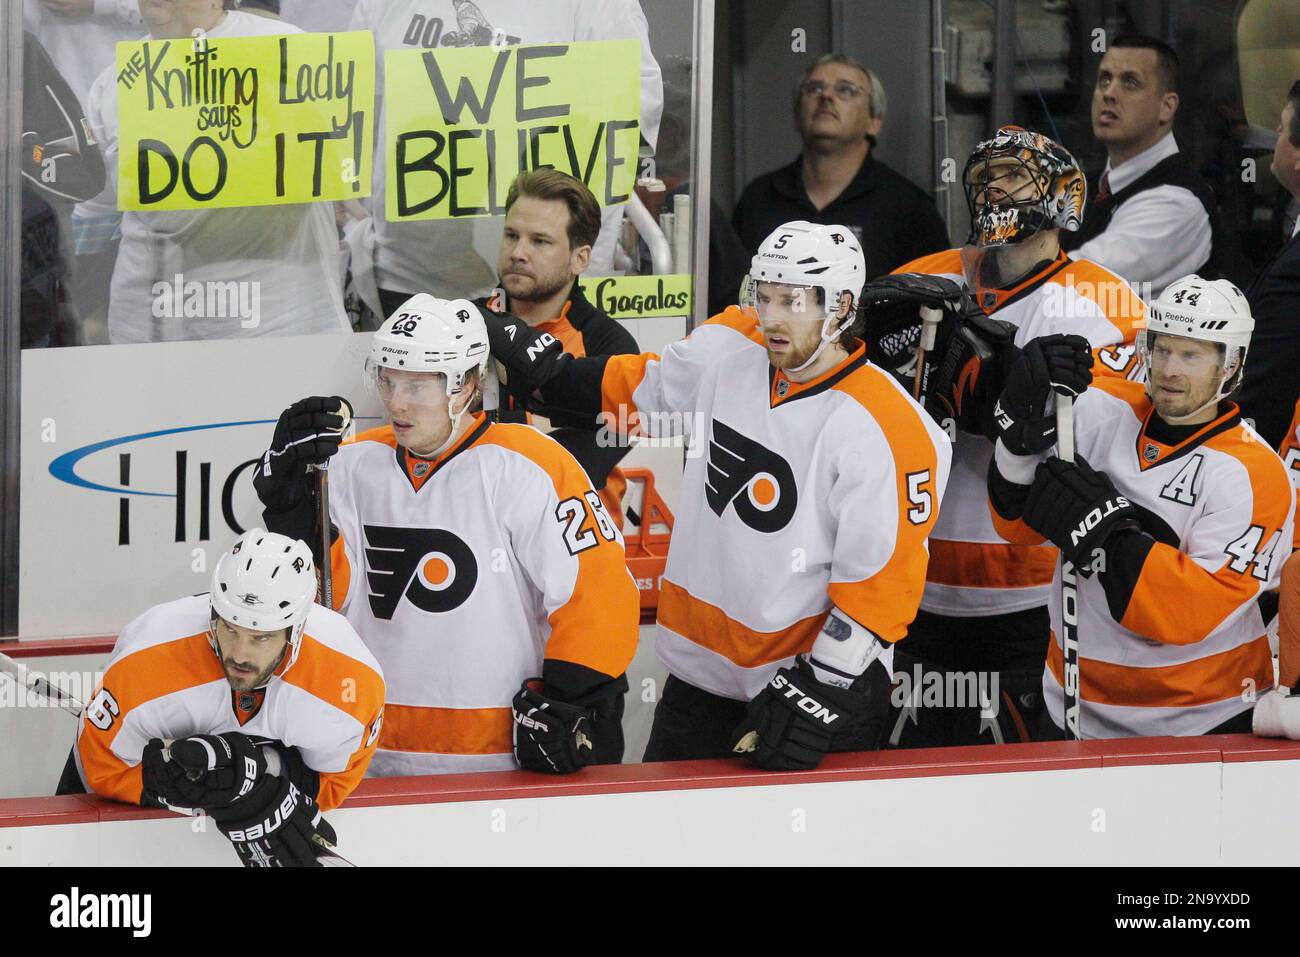 Pittsburgh Penguins Vs. Philadelphia Flyers, NHL Playoffs 2012: Complete  Series Coverage 